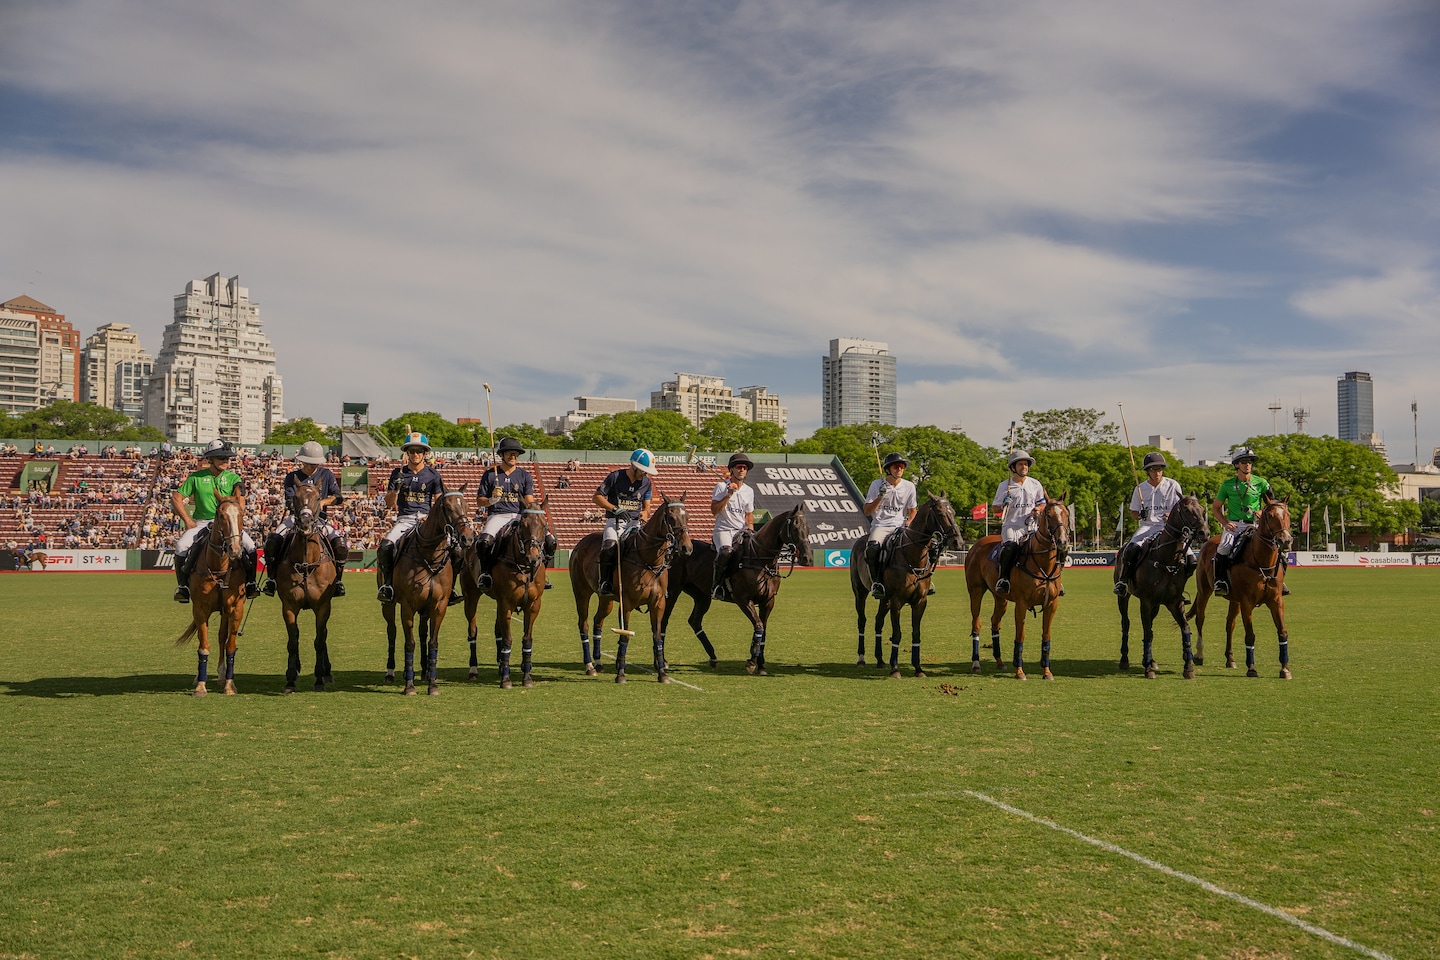 Game of clones: Science is immortalizing Argentina’s top polo horses